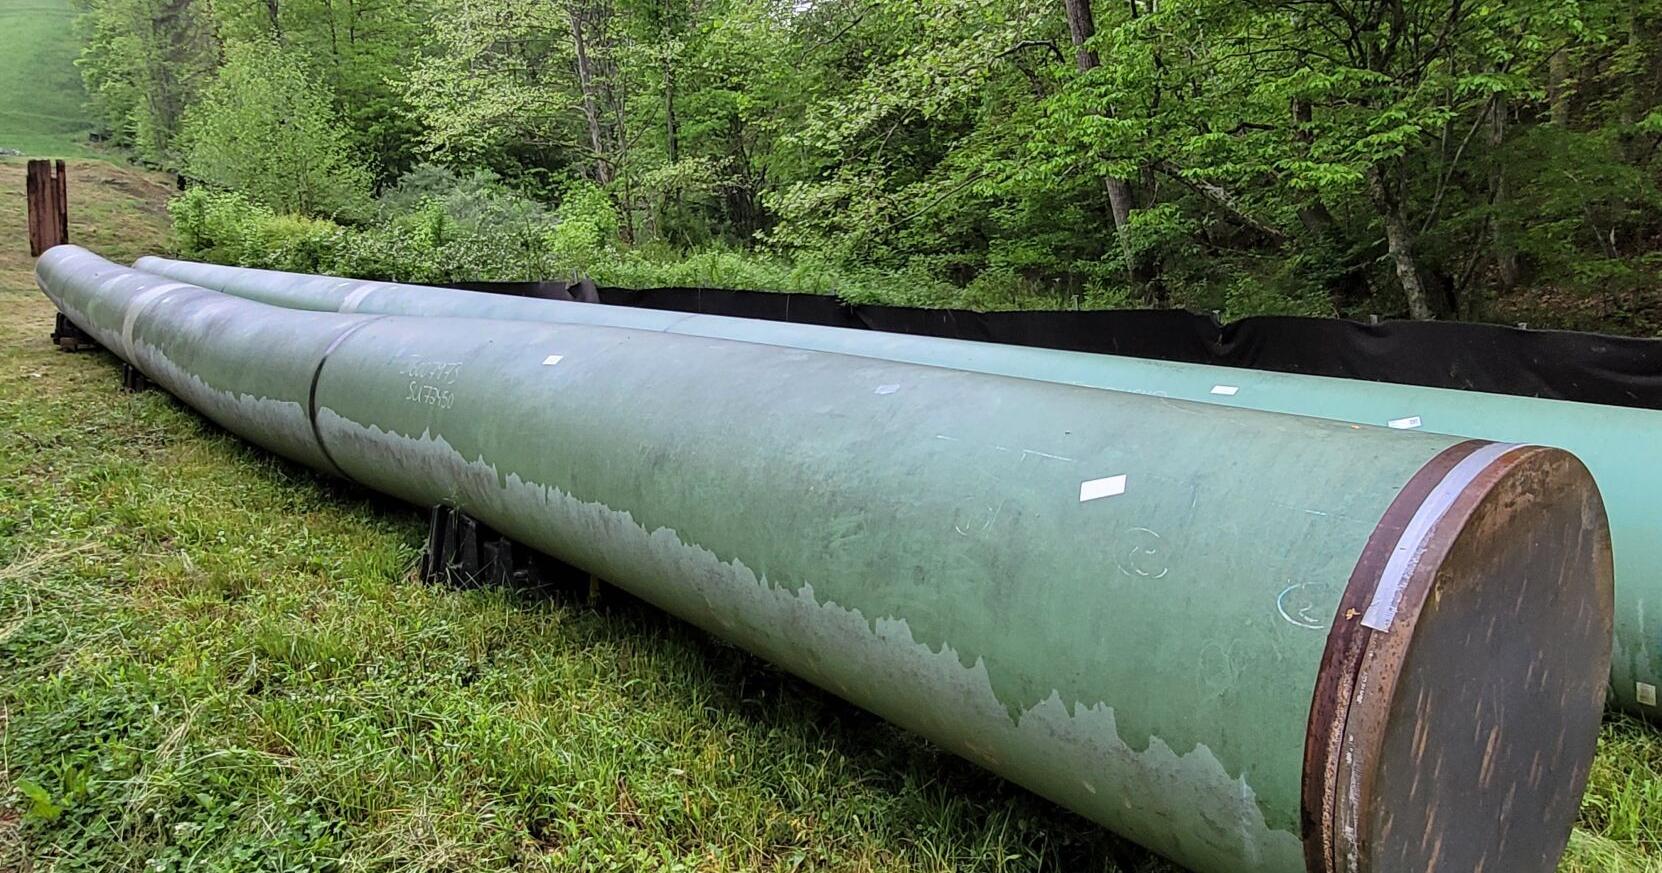 "When you can't win, cheat!": WV environmentalists blast debt limit deal designed to force Mountain Valley Pipeline completion